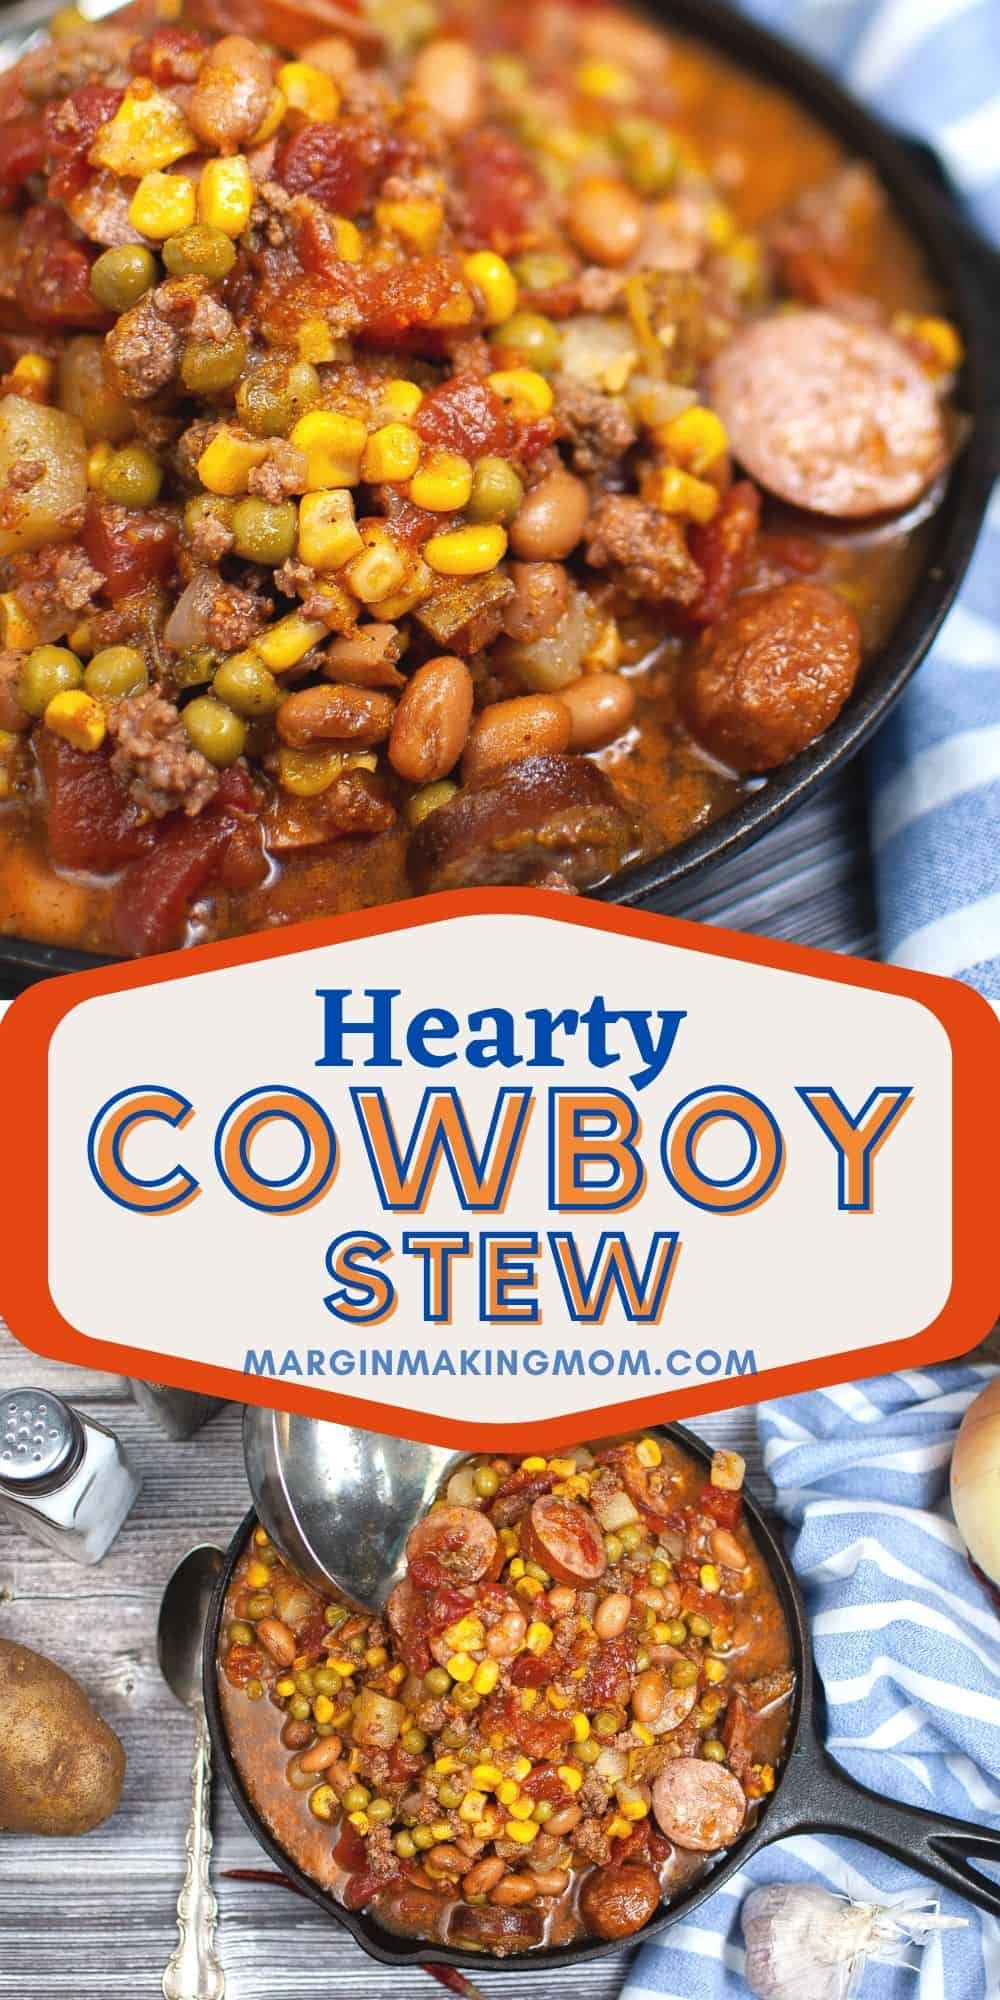 collage image featuring two photos of cowboy stew in cast iron skillet. One is an overhead view and the other is a close-up view.